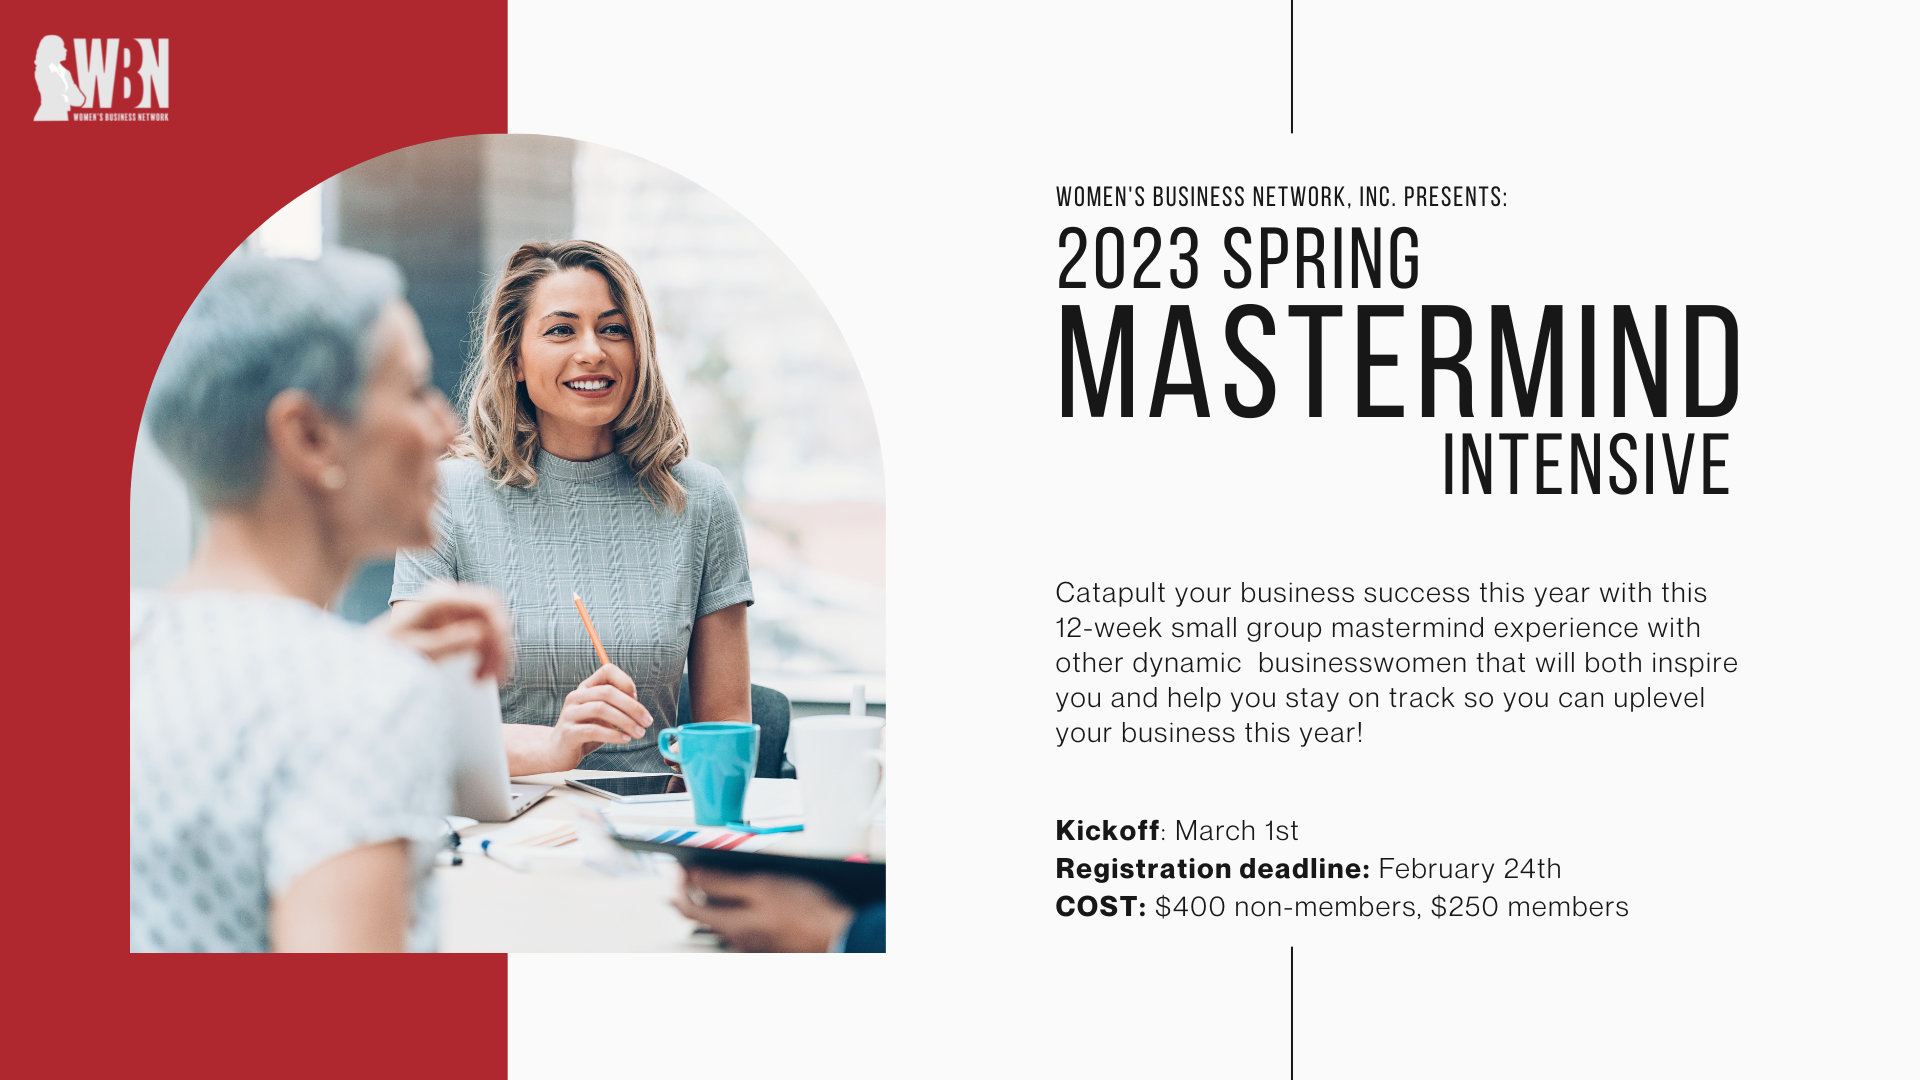 On the fence about joining the 2023 Spring Intensive Mastermind Workshop?